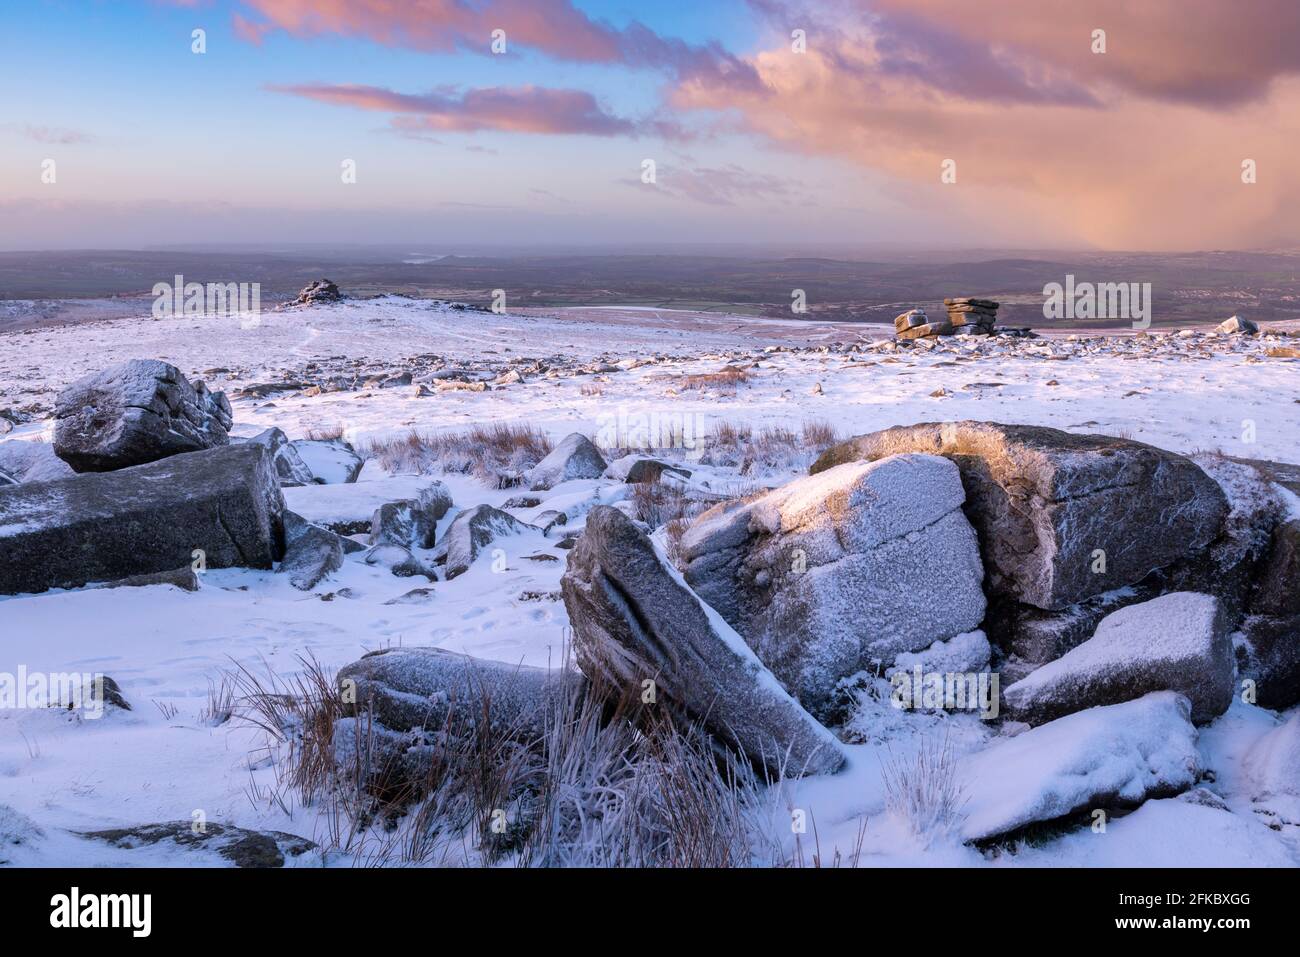 Snow covered granite outcrops on Great Staple Tor, Dartmoor National Park, Devon, England, United Kingdom, Europe Stock Photo